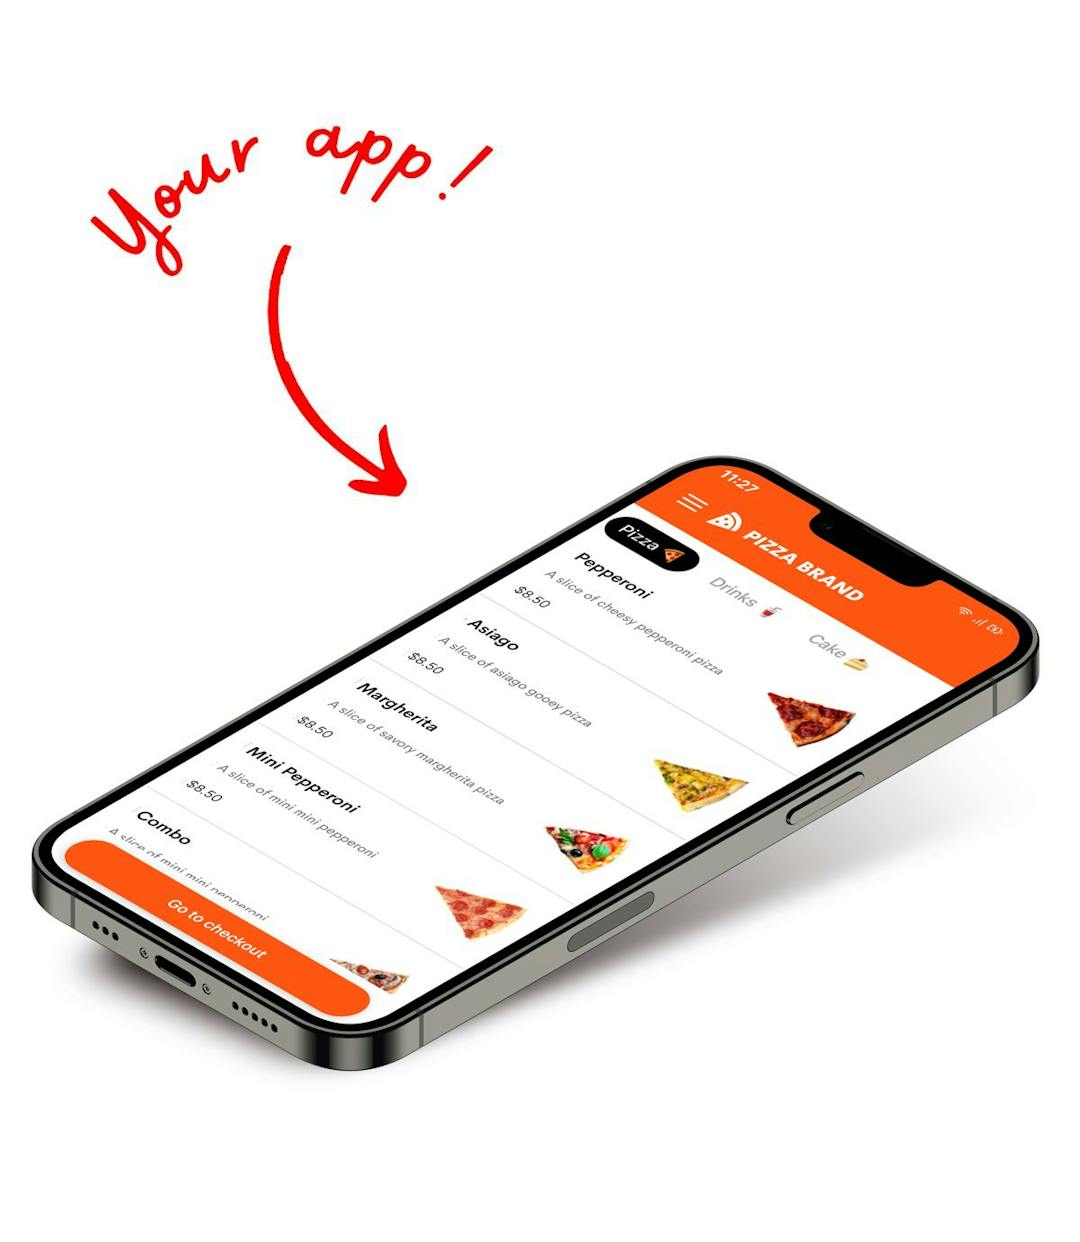 <h2 style="letter-spacing:-2.5px;line-height:70px">Your Branded Pizza Mobile Ordering App</h2>